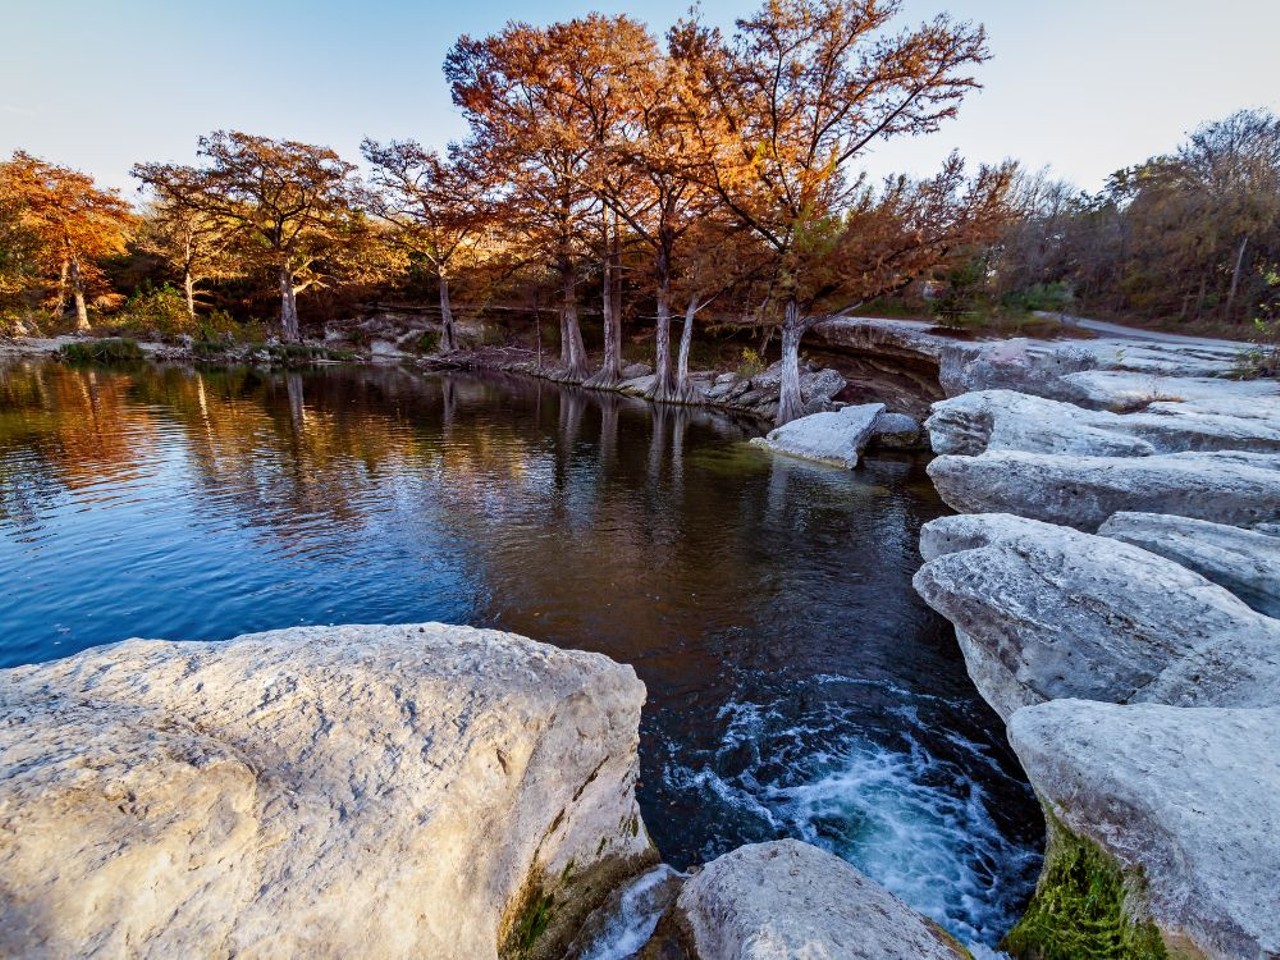 McKinney Falls State Park
5808 McKinney Falls Pkwy, Austin, (512) 243-1643, tpwd.texas.gov
McKinney Falls is a short drive north, located within Austin's city limits at the confluence of Onion Creek and Williamson Creek. This spot is truly an escape from city life without being out in the sticks. There’s a hard-surface trail that’s perfect for wheels, or you can opt for a traditional, rugged hike. Though you likely won’t want to go for a swim, the beauty of the waterfalls are worth checking out, too.